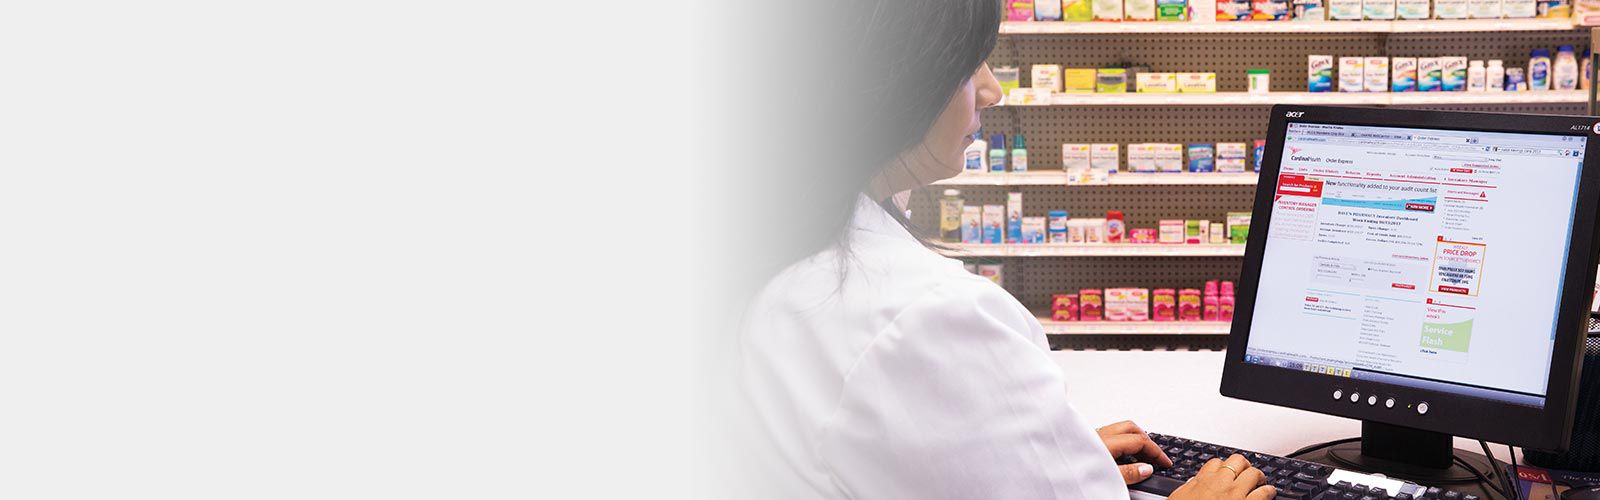 Pharmacist ordering from an online ordering system.